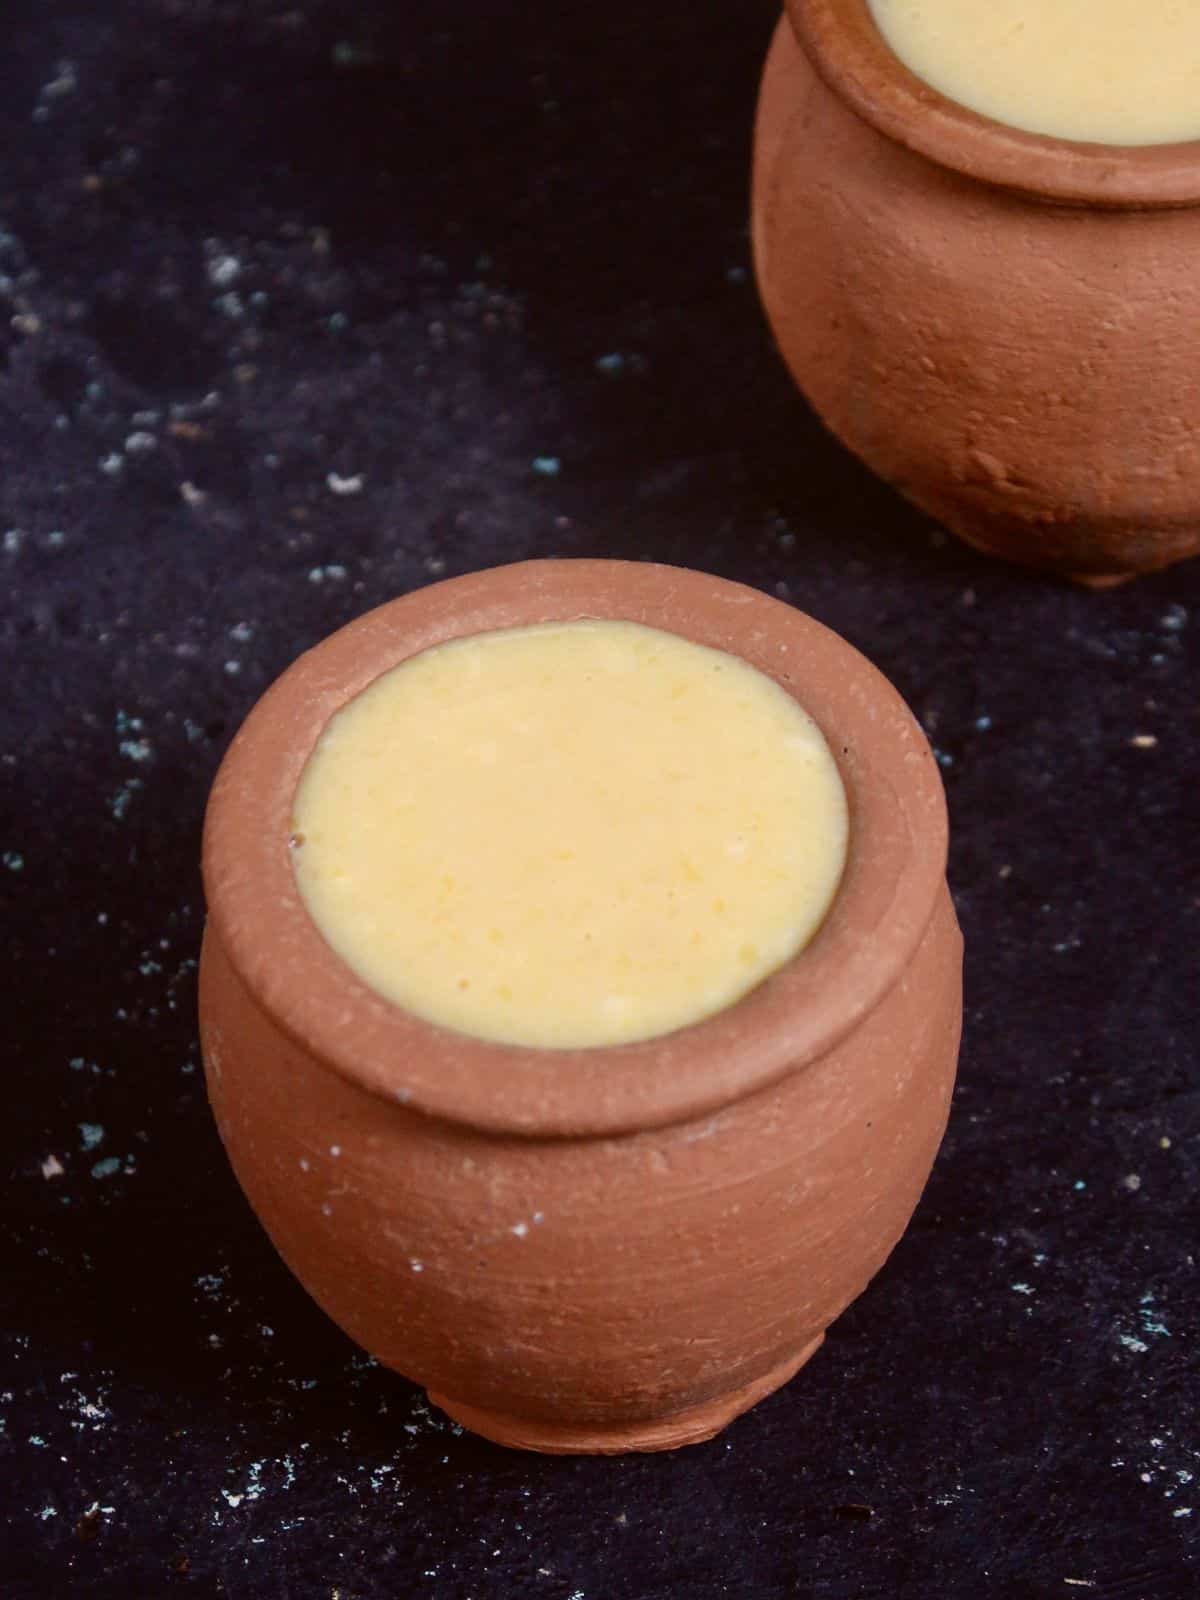 trf the rabdi mixture into the earthen cups 